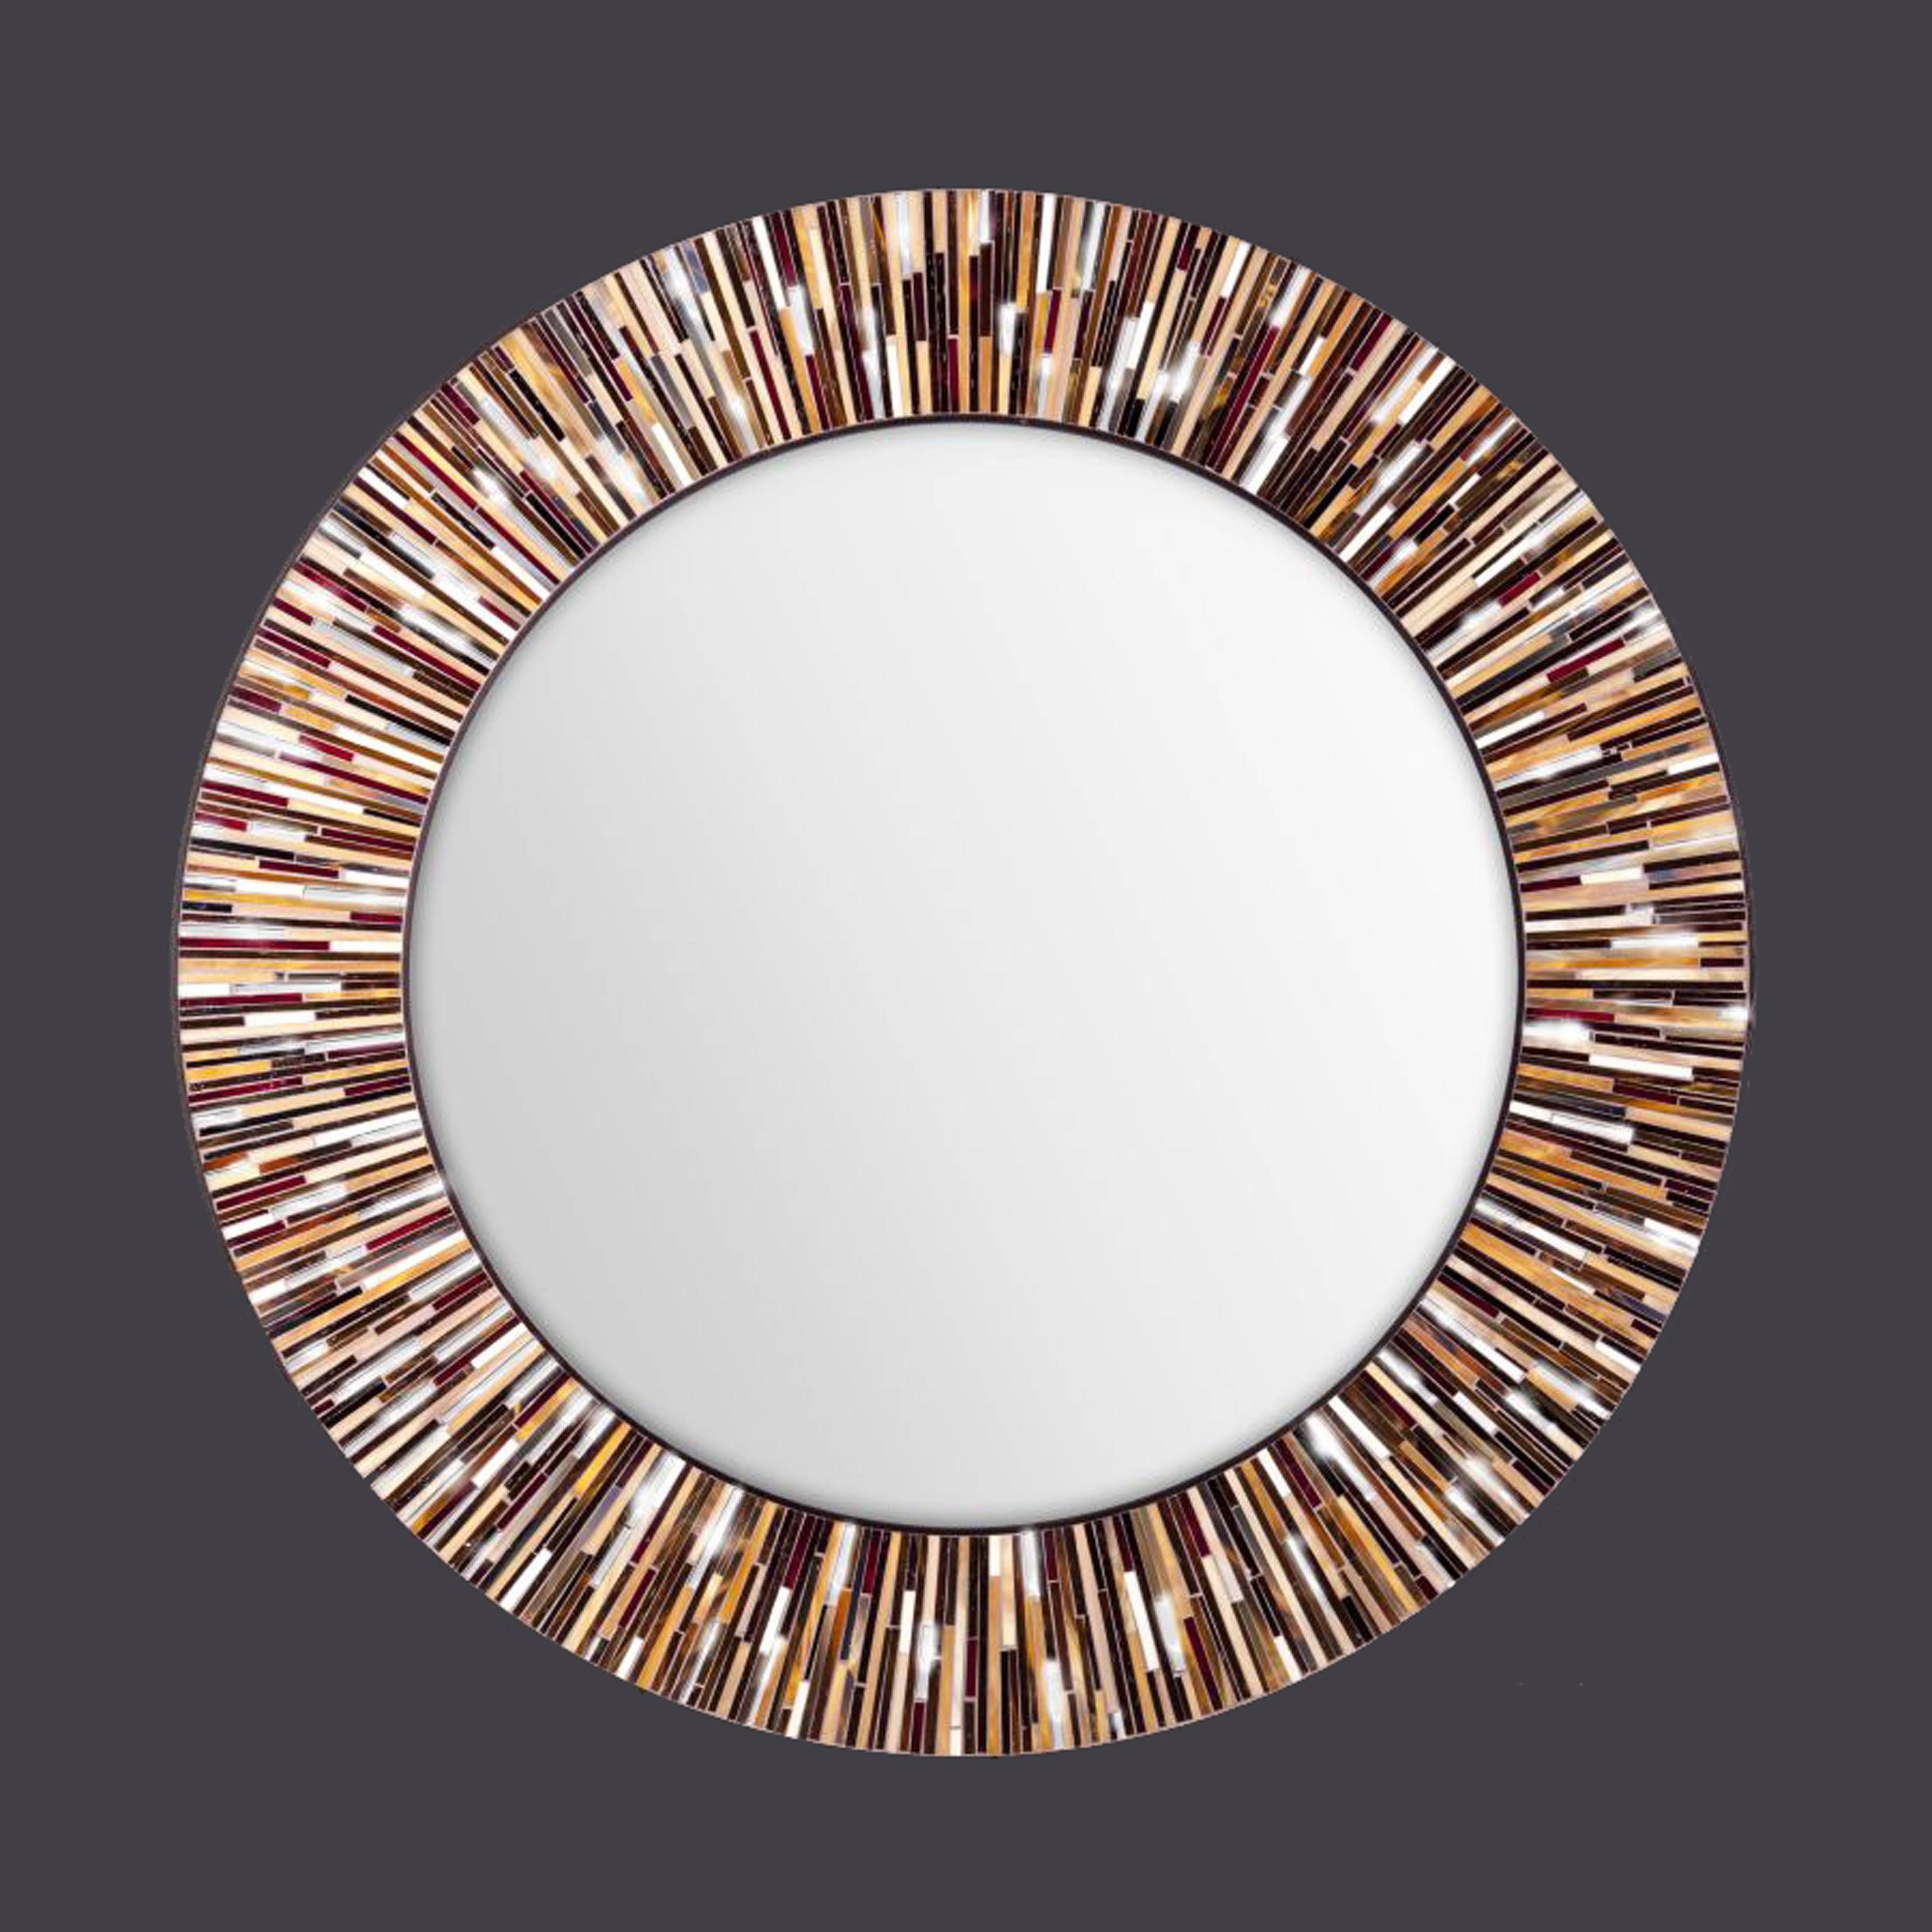 Mosaic Mirrors For Sale 109 Stunning Decor With All White Wall Intended For Large Circular Mirrors (View 13 of 25)